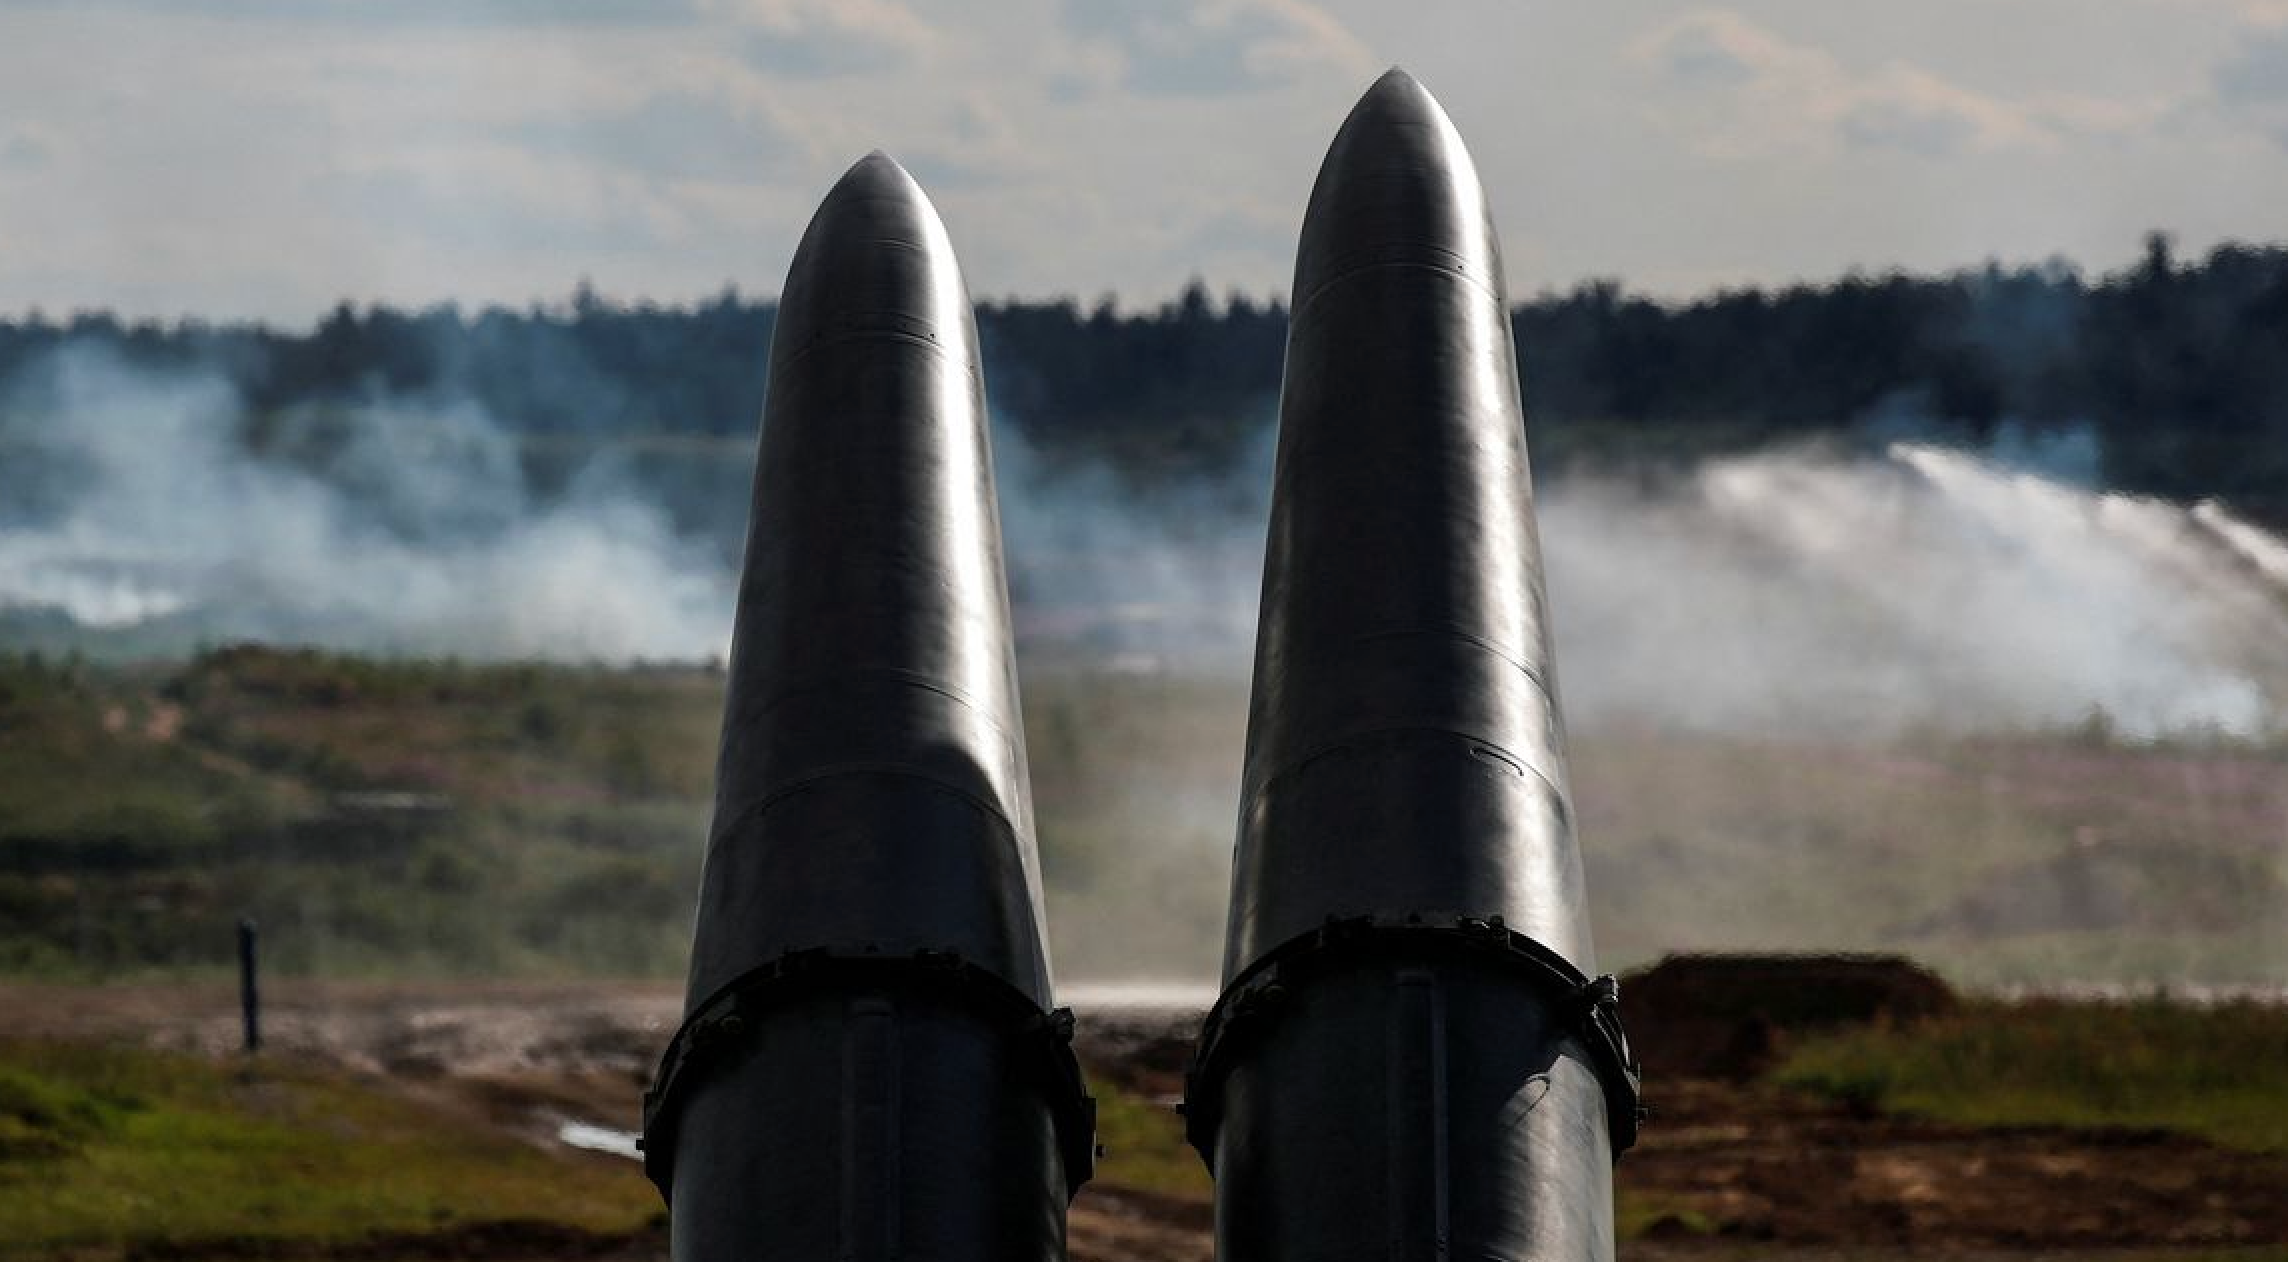 US urges NATO vigilance for signs Russia could use nuclear weapon in Ukraine